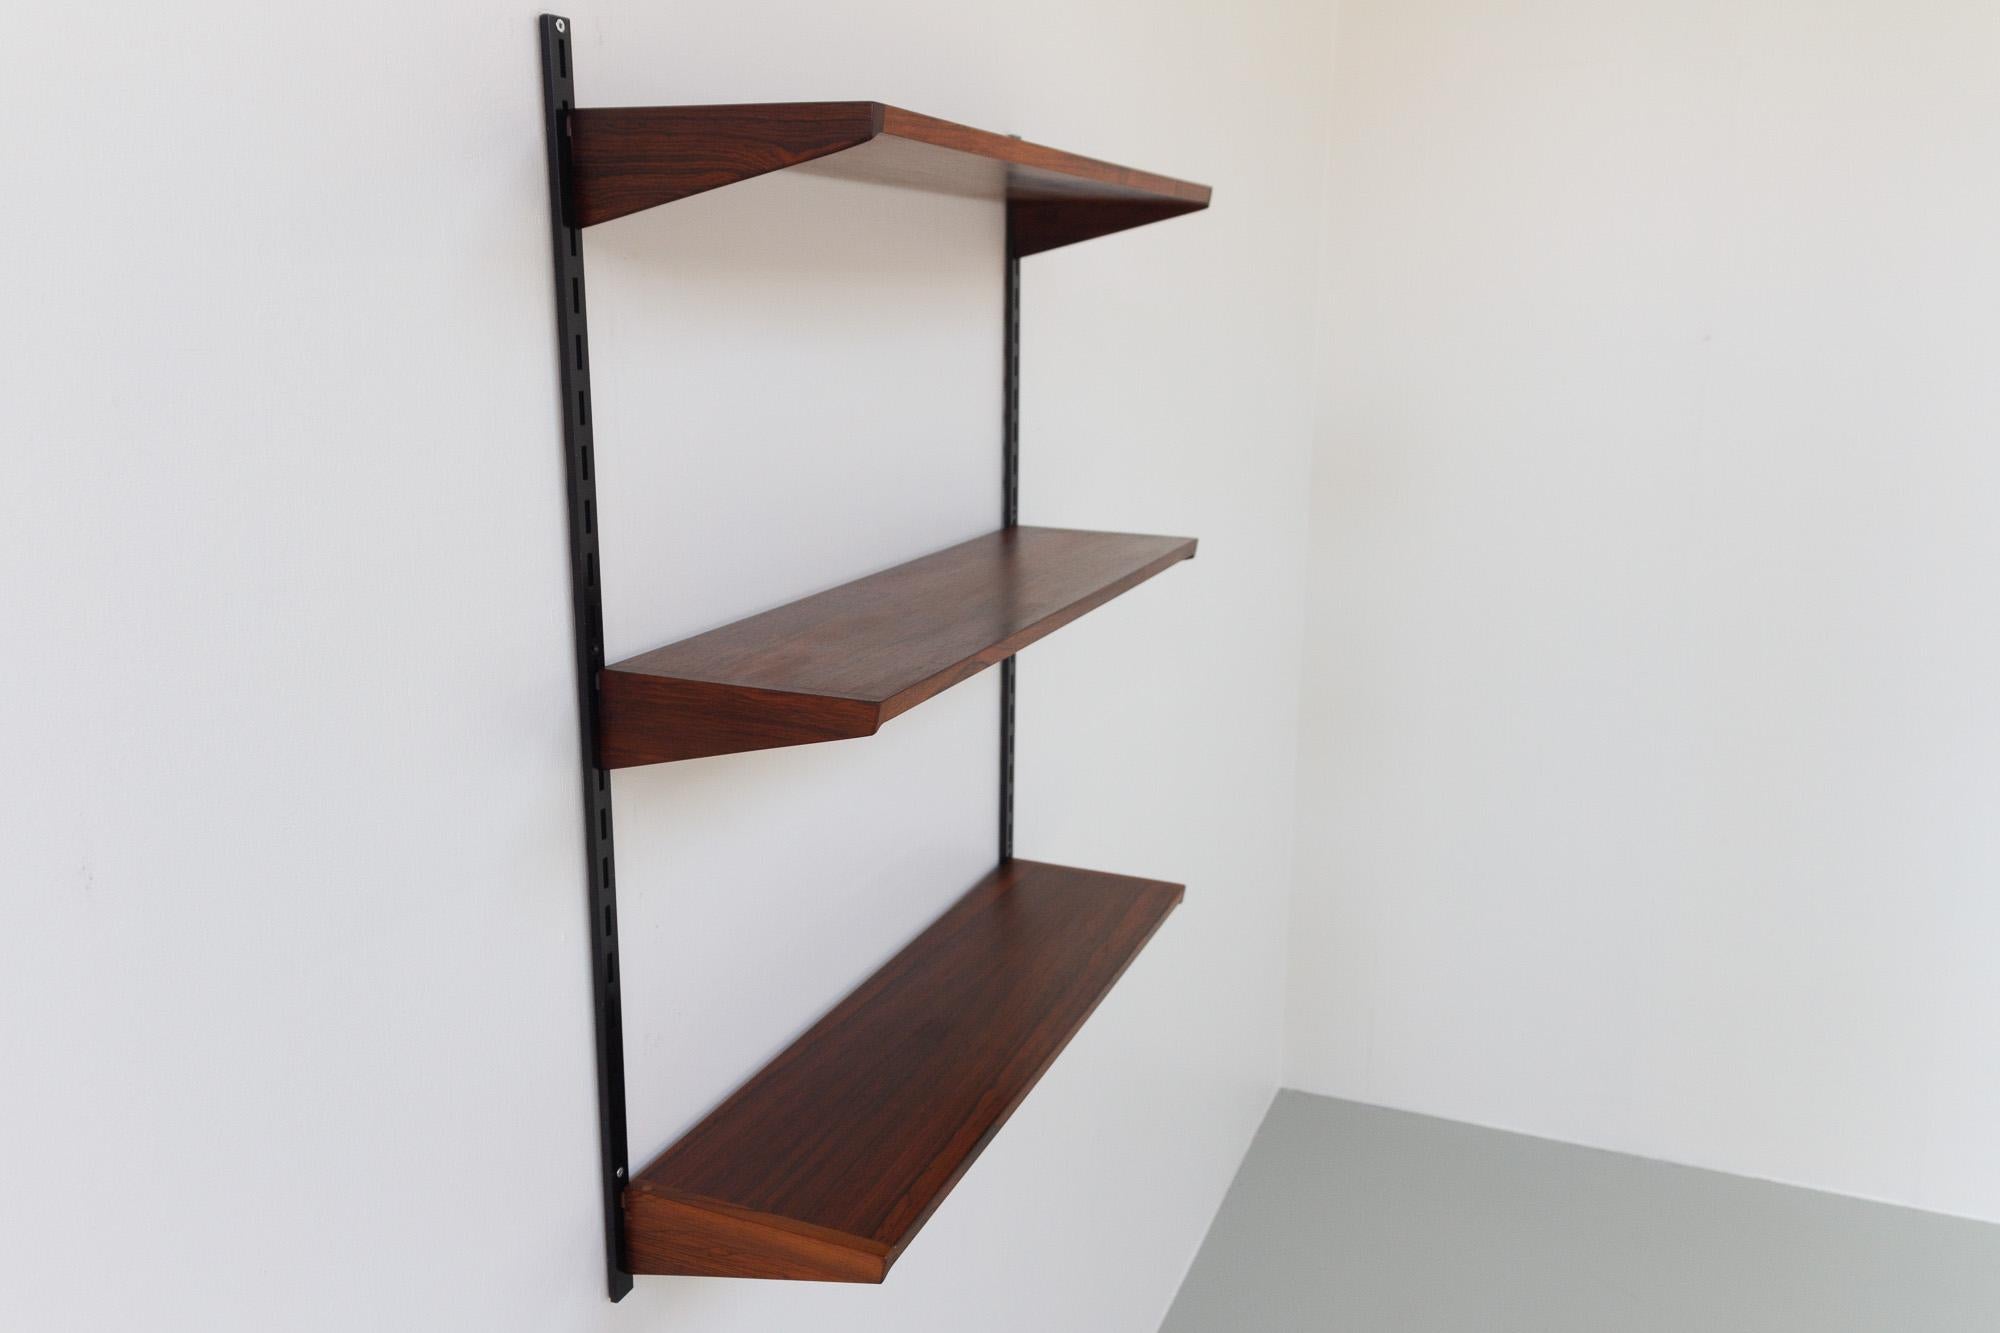 Vintage Danish Rosewood Wall Unit by Kai Kristiansen for FM, 1960s For Sale 14